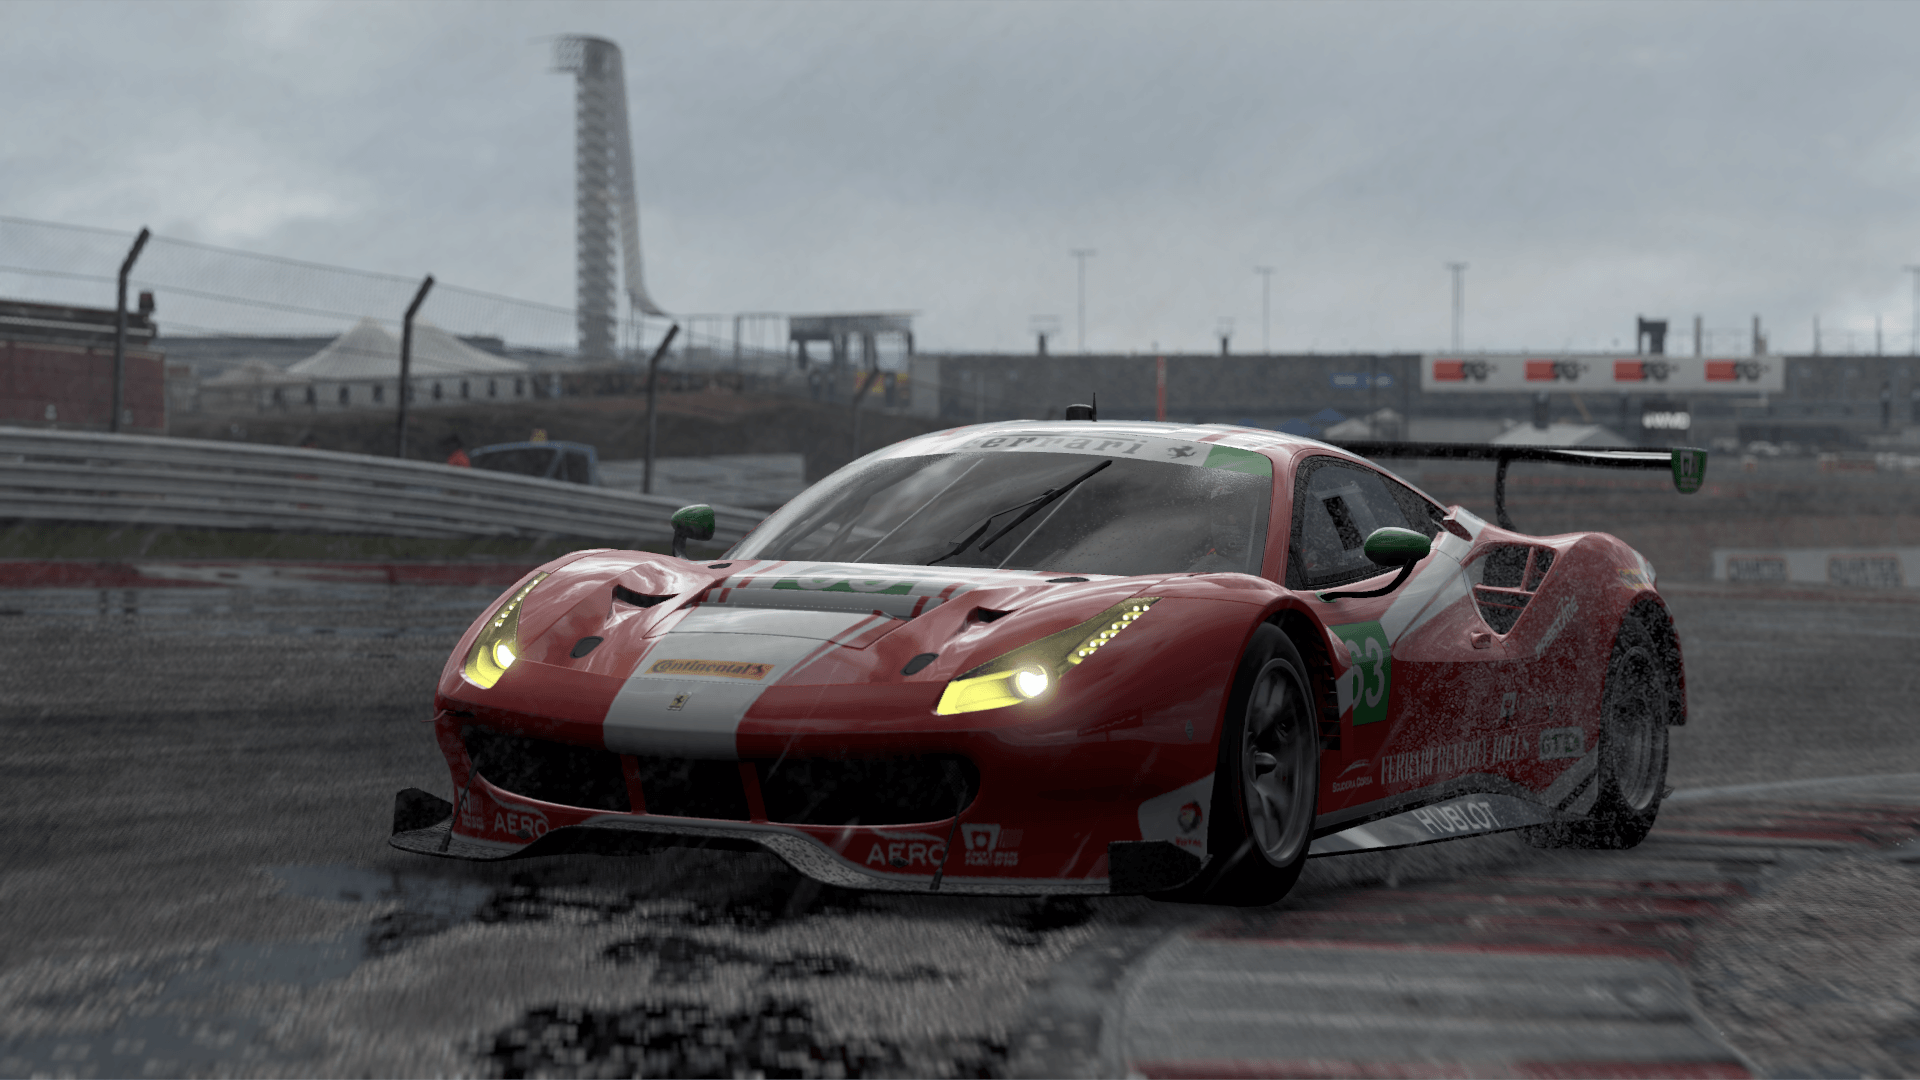 Project Cars 4K Wallpapers - Top Free Project Cars 4K Backgrounds ...